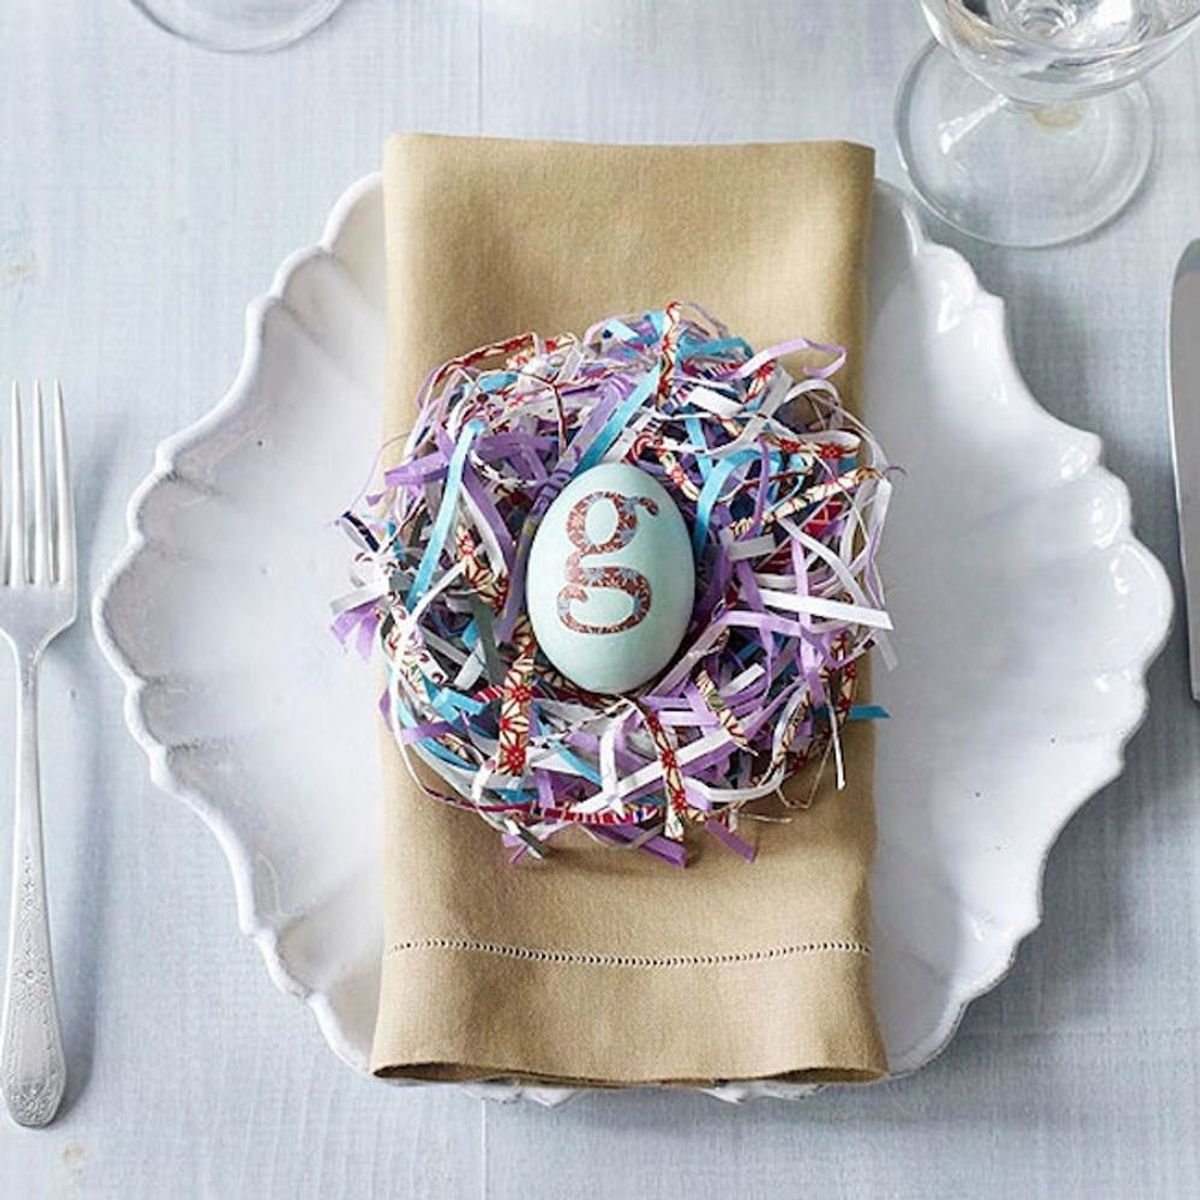 12 Steps to an Epic Easter Brunch